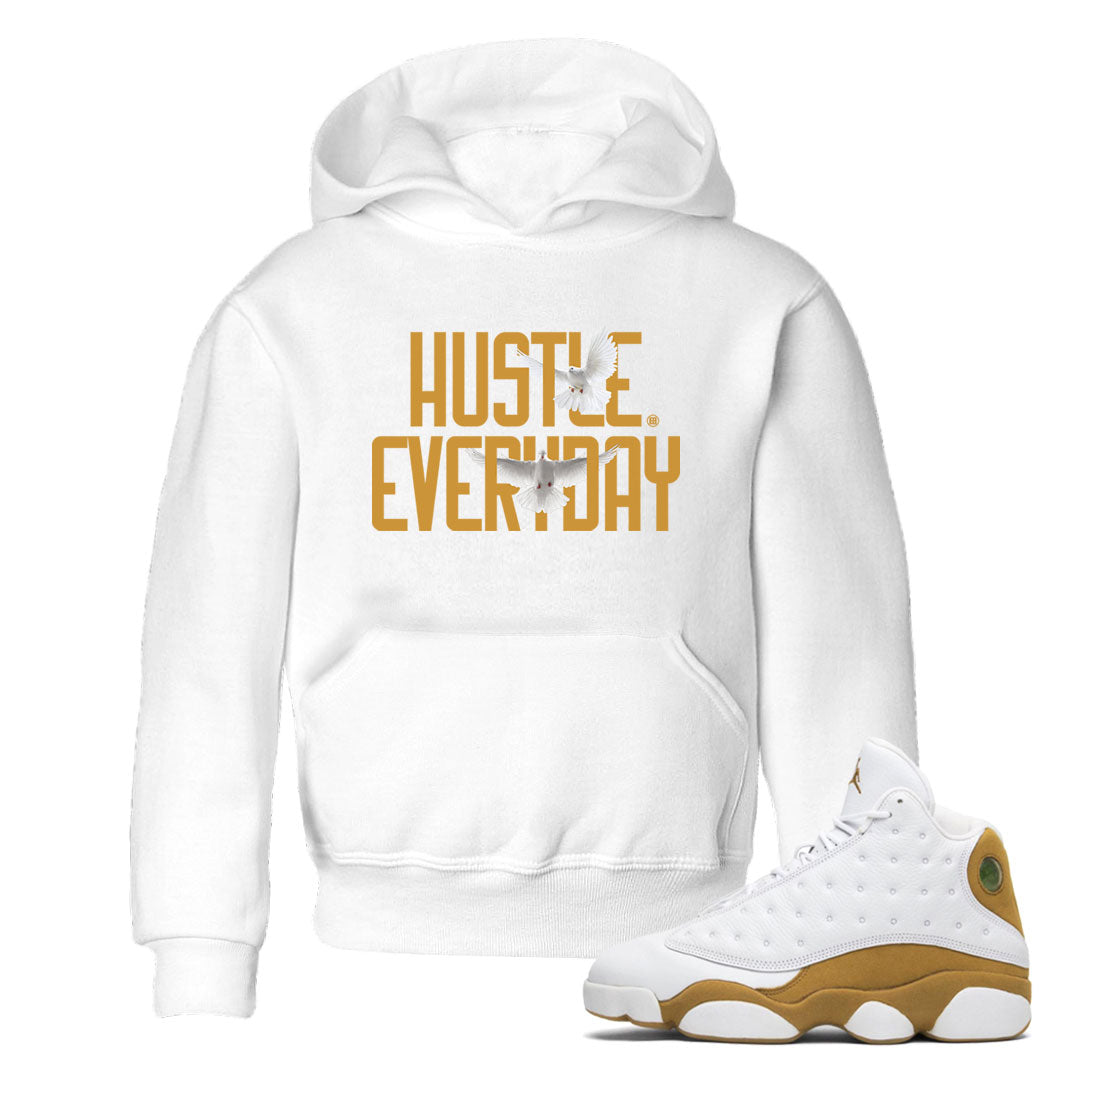 Air Jordan 13 Retro Wheat Sneaker Matching Clothes Daily Hustle Streetwear Sneaker Shirt Air Jordan 13 Wheat Drip Gear Zone Sneaker Matching Clothing Kids and Baby Youth Shirts White 1